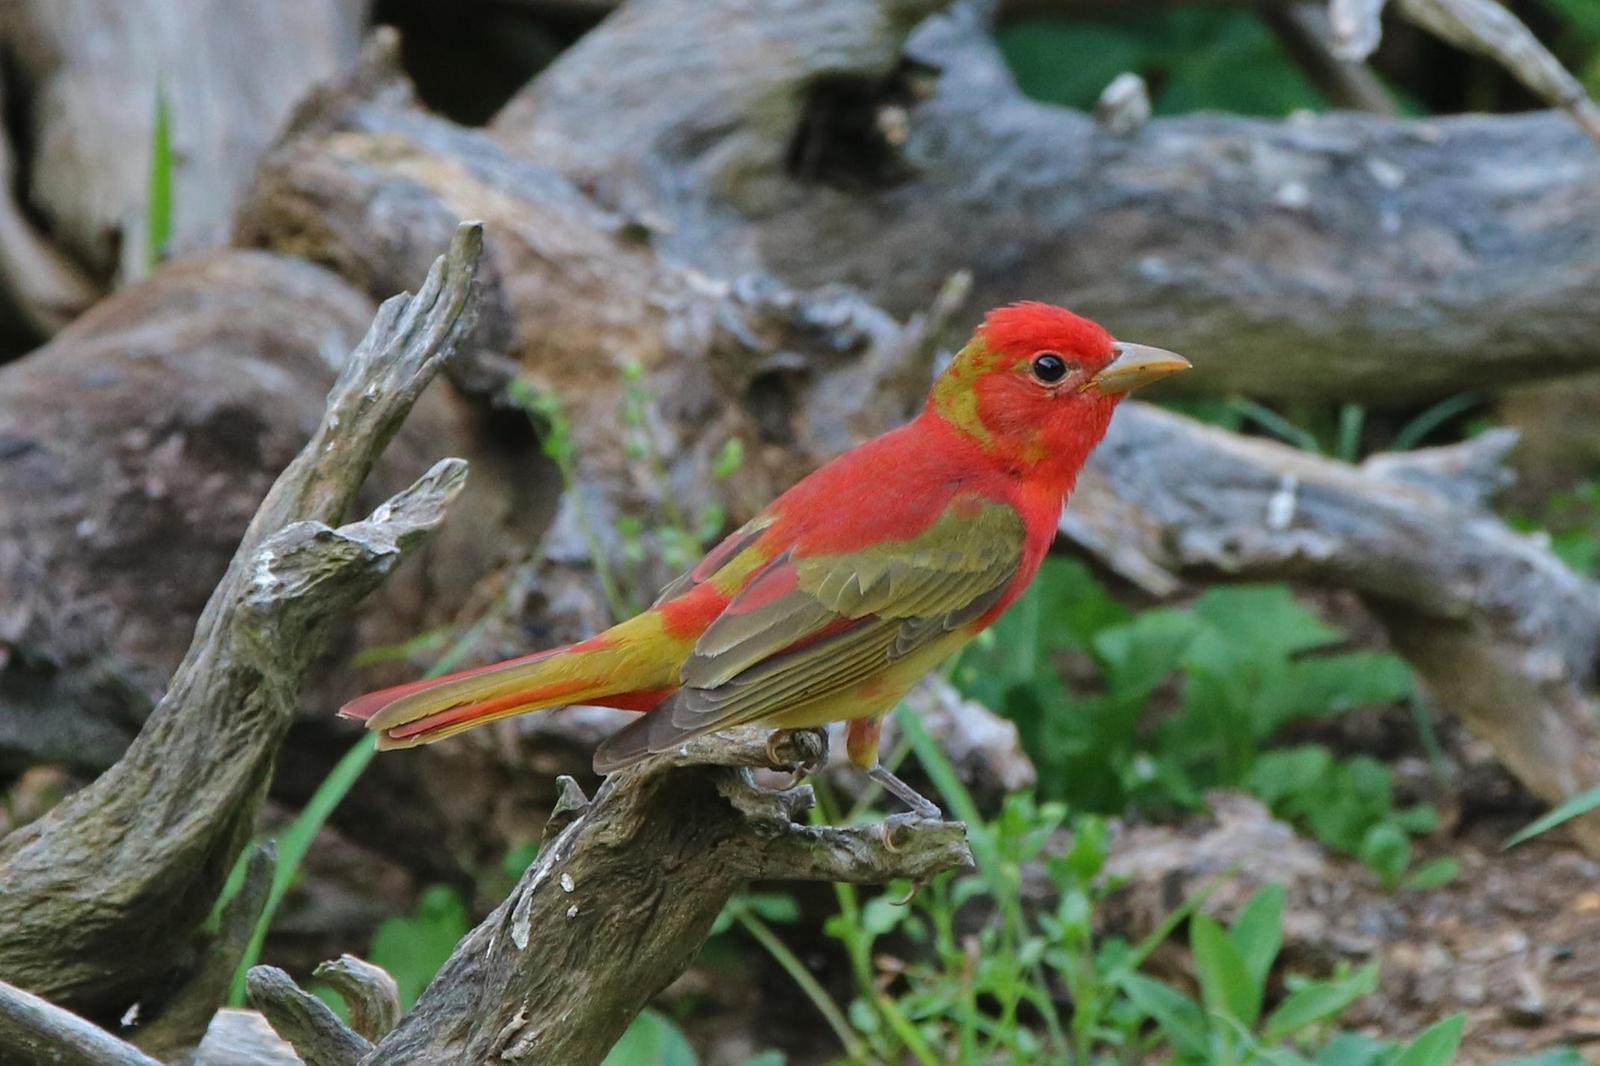 Summer Tanager Photo by Kristy Baker